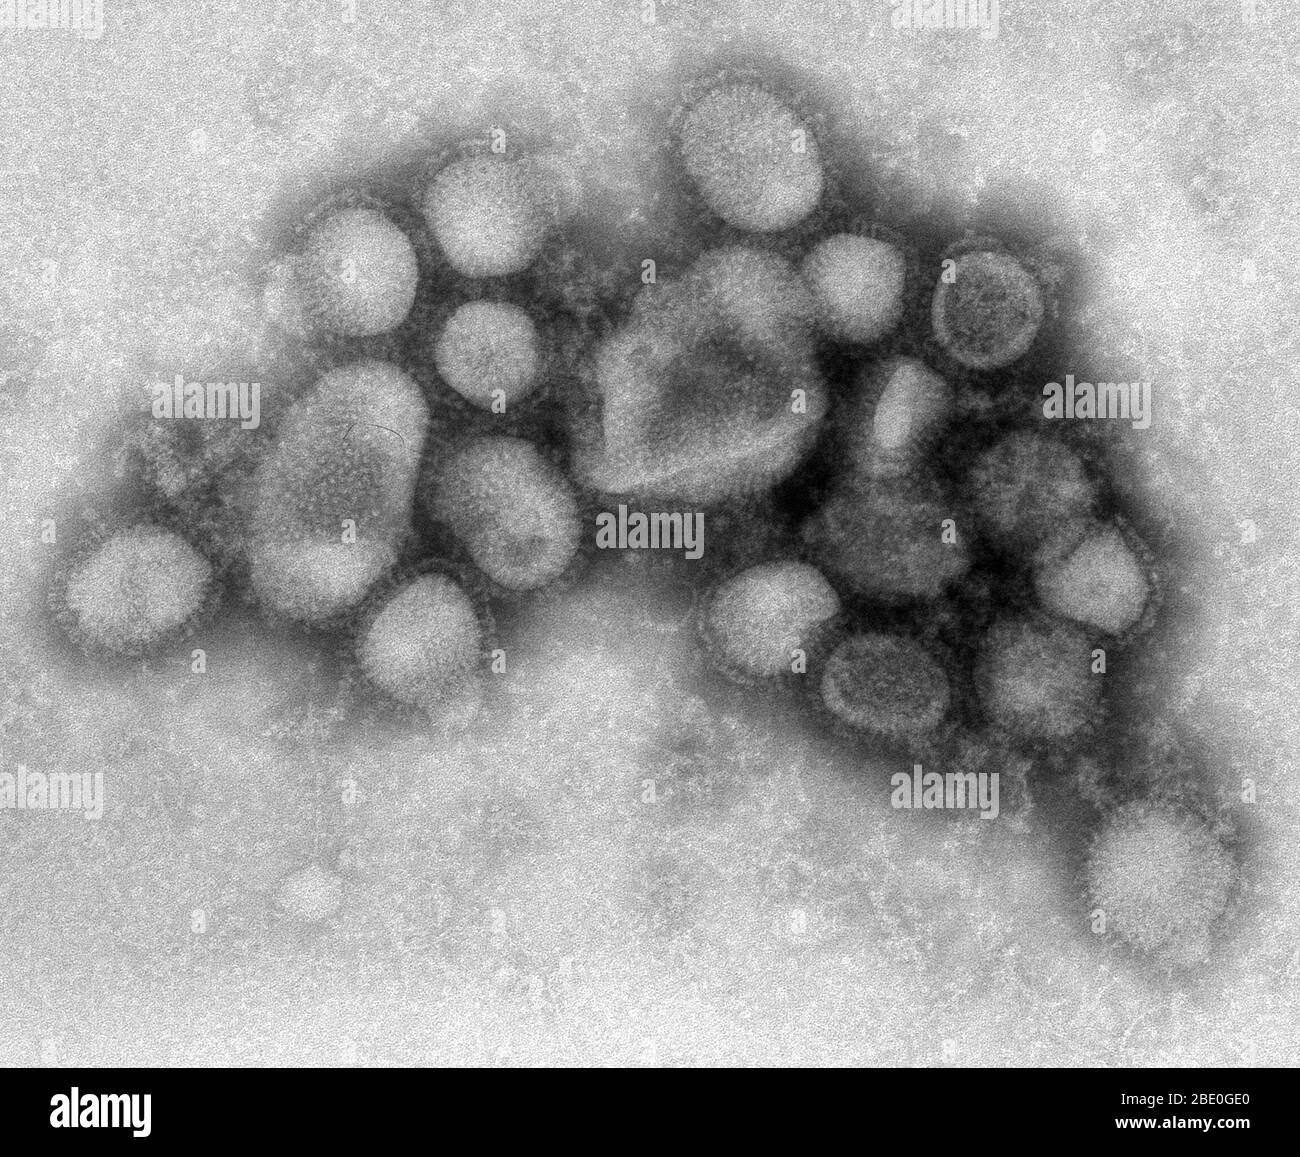 Negative stained transmission electron micrograph (TEM) of some of the ultrastructural morphology of the A/CA/4/09 swine flu virus. Swine Influenza (swine flu) is a respiratory disease of pigs caused by type A influenza virus that regularly causes outbreaks of influenza in pigs. Swine flu viruses cause high levels of illness and low death rates in pigs. Swine influenza viruses may circulate among swine throughout the year, but most outbreaks occur during the late fall and winter months similar to outbreaks in humans. The classical swine flu virus (an influenza type A H1N1 virus) was first isol Stock Photo